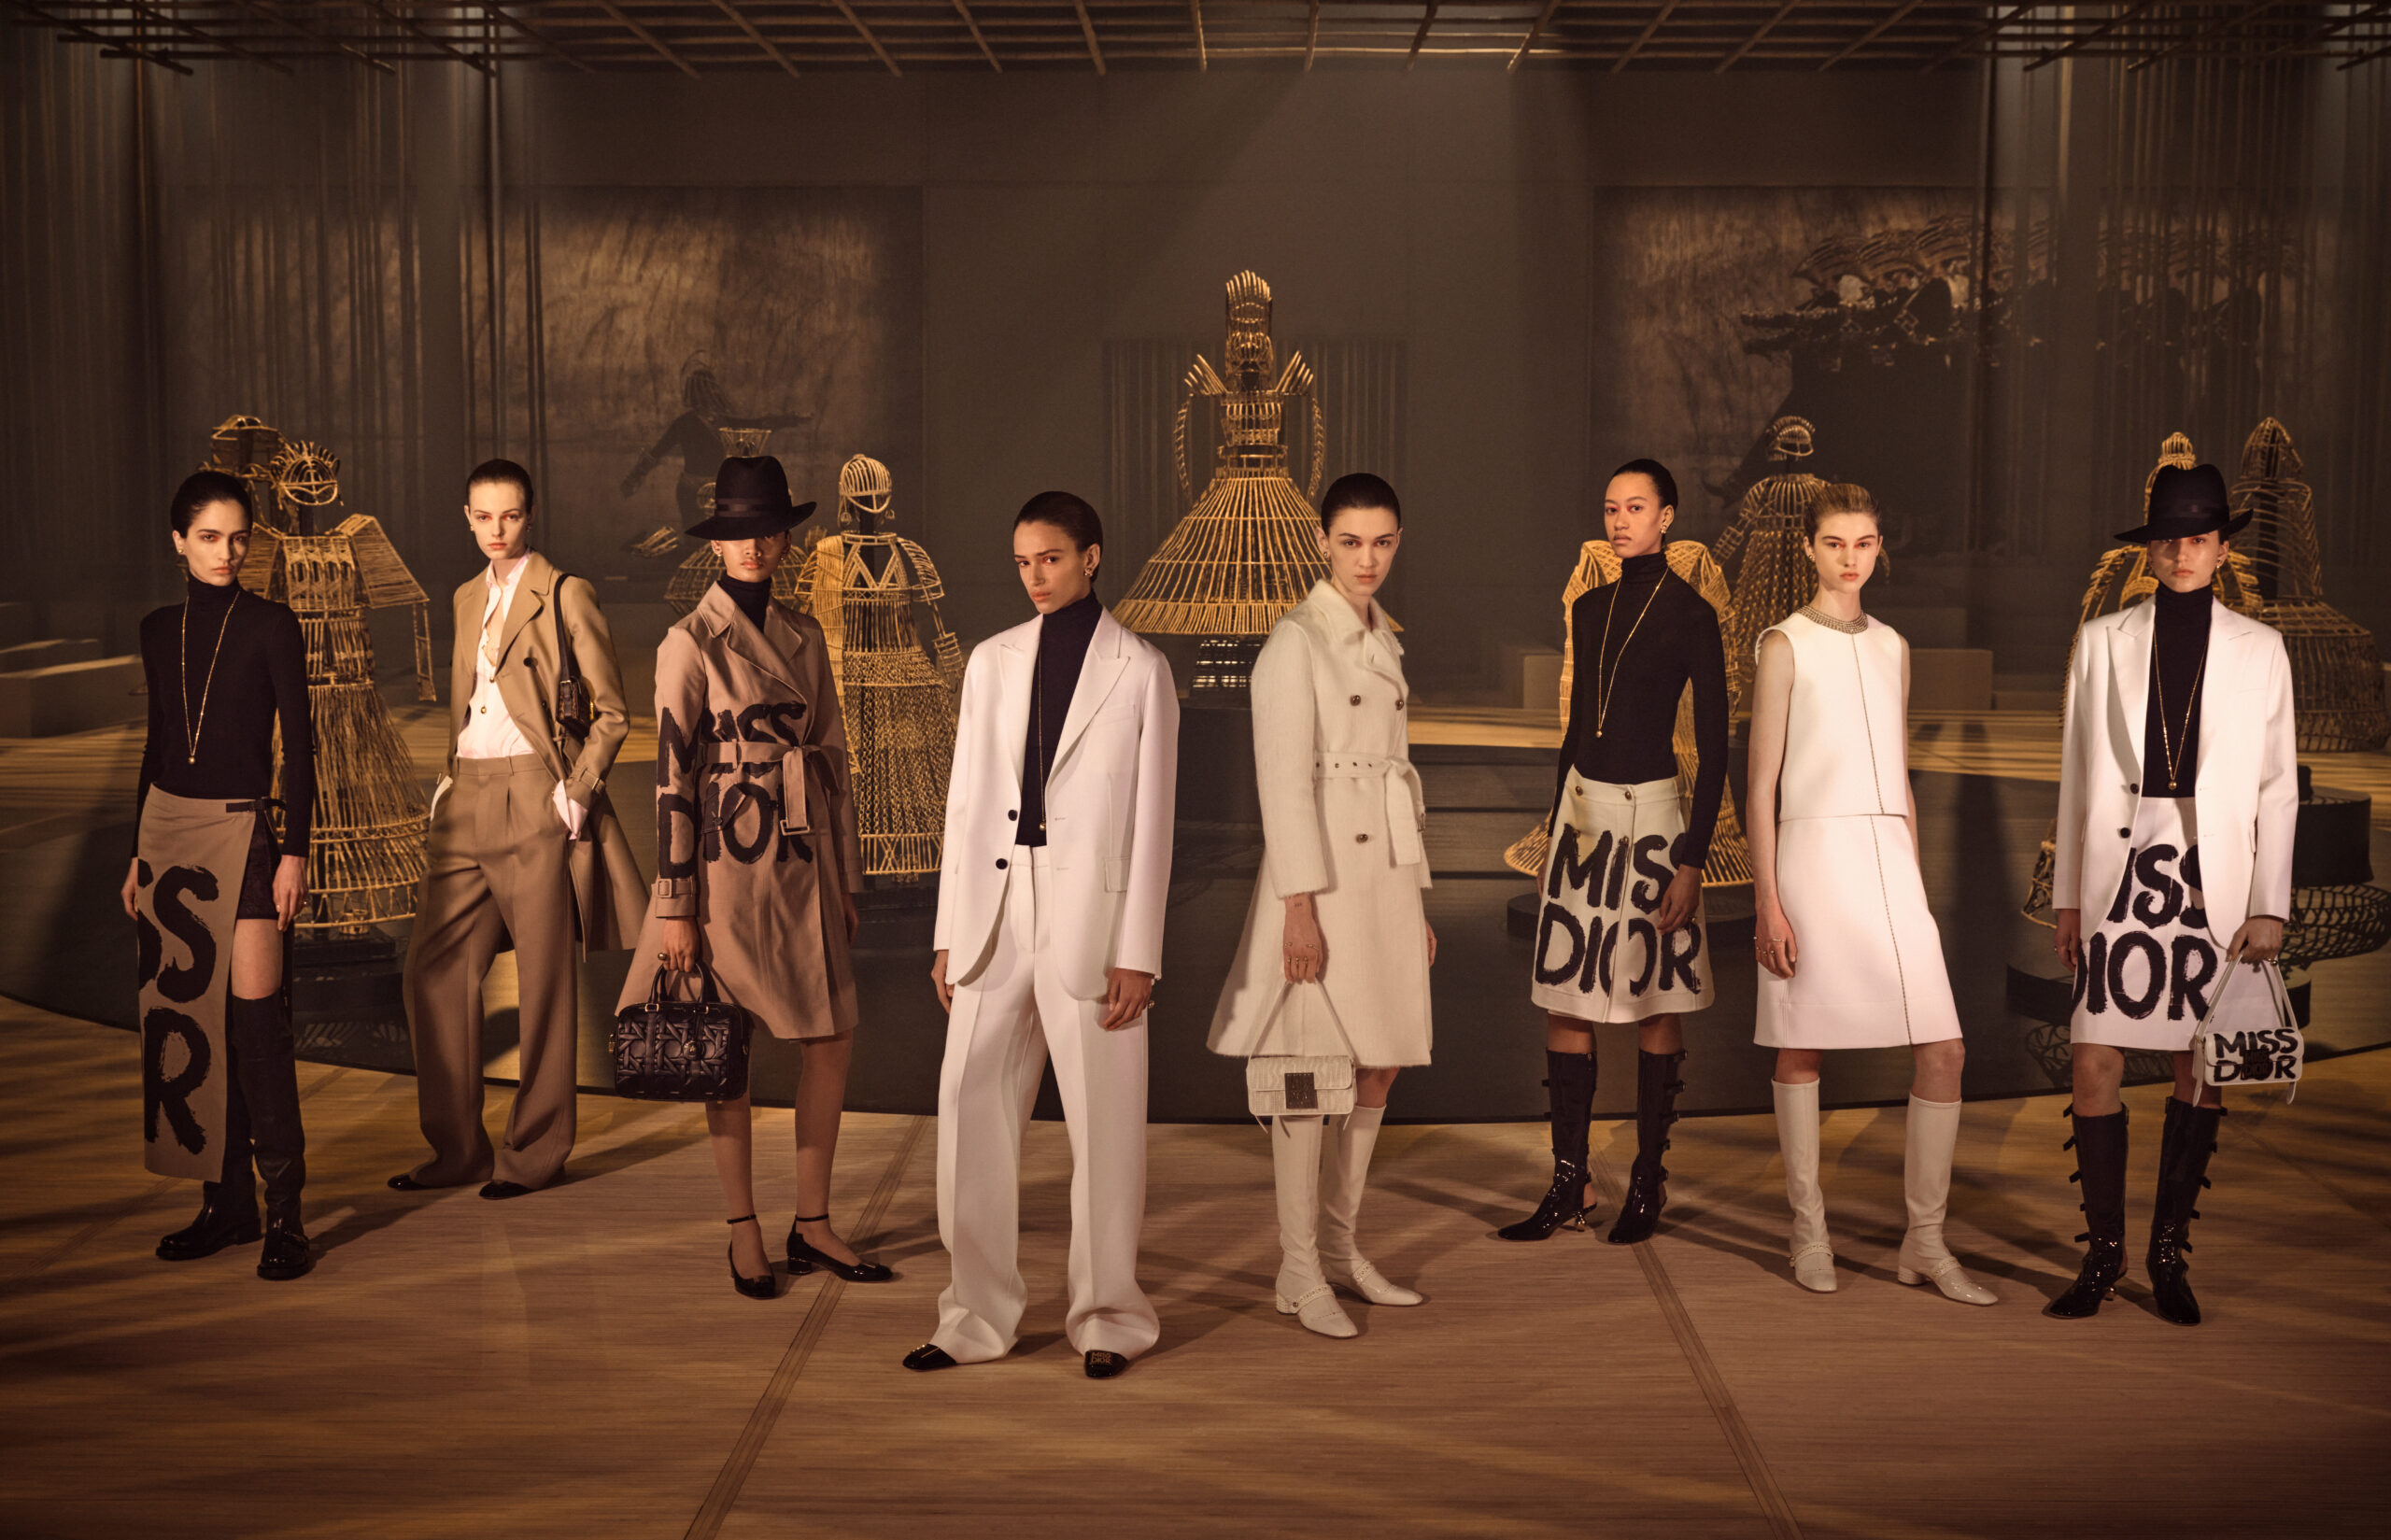 A line-up of models in Dior's latest collection, with cane art sculptures in the background on a fashion show runway.